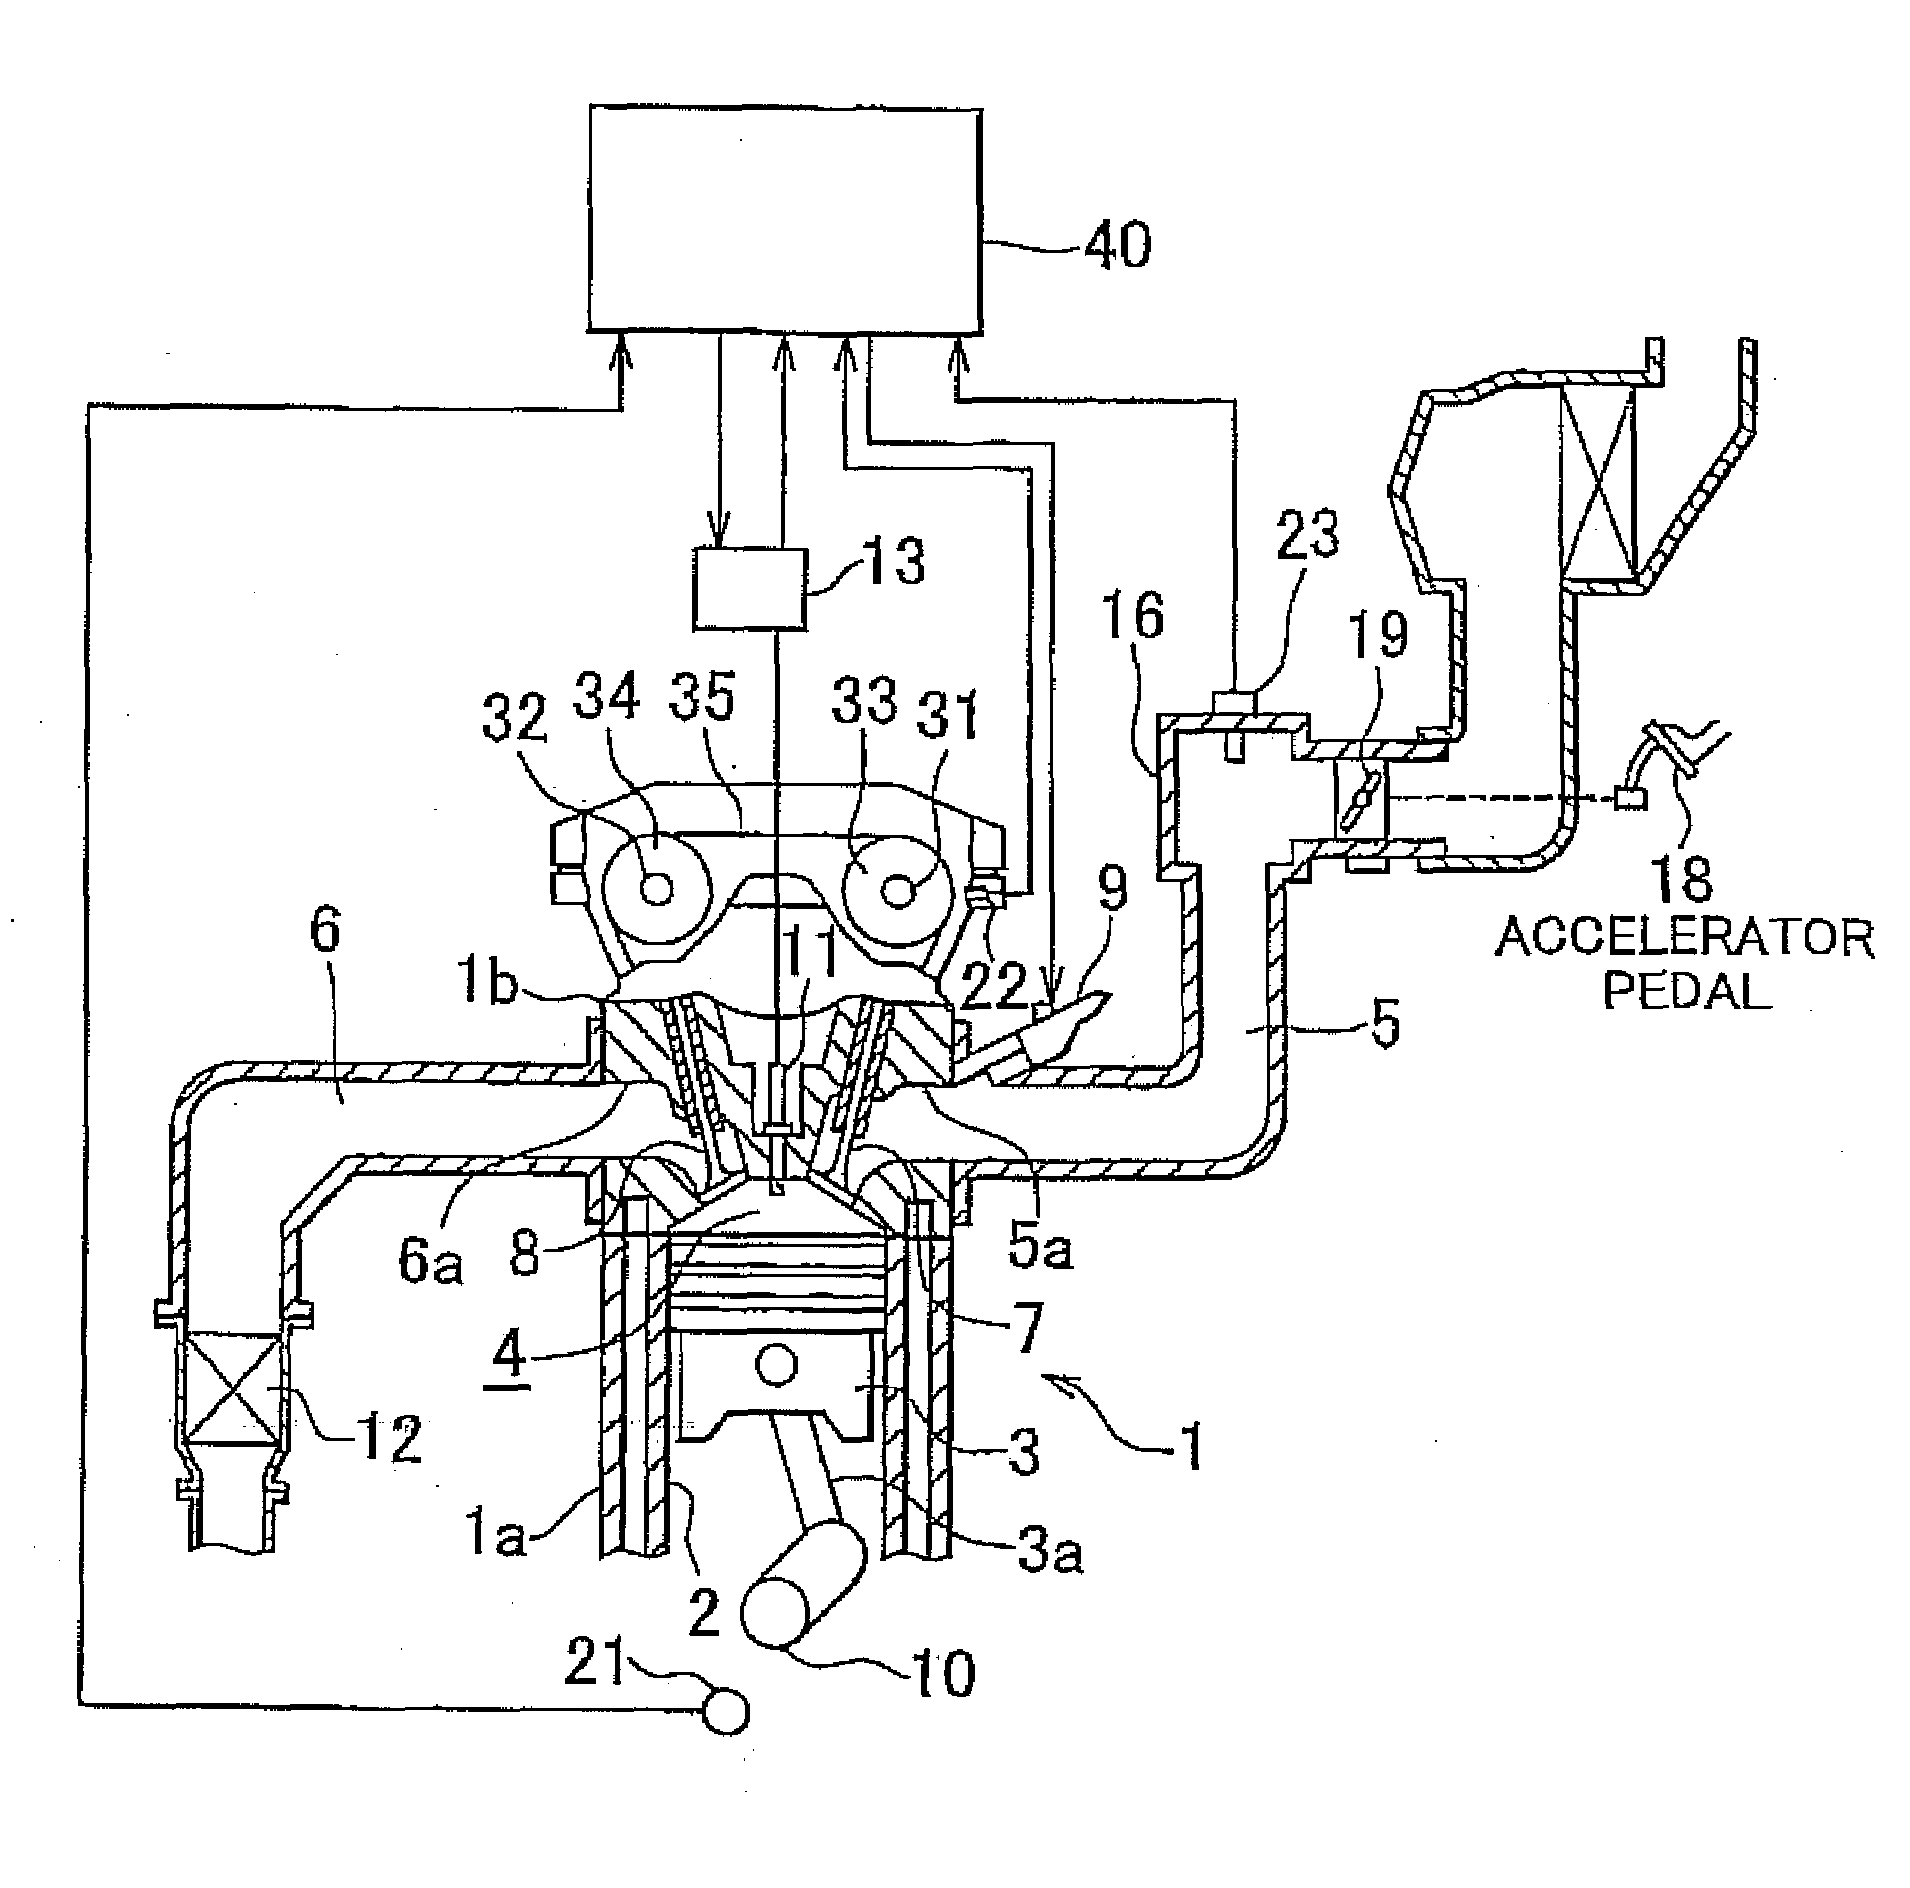 Misfire determination device and misfire determination method for internal combustion engine